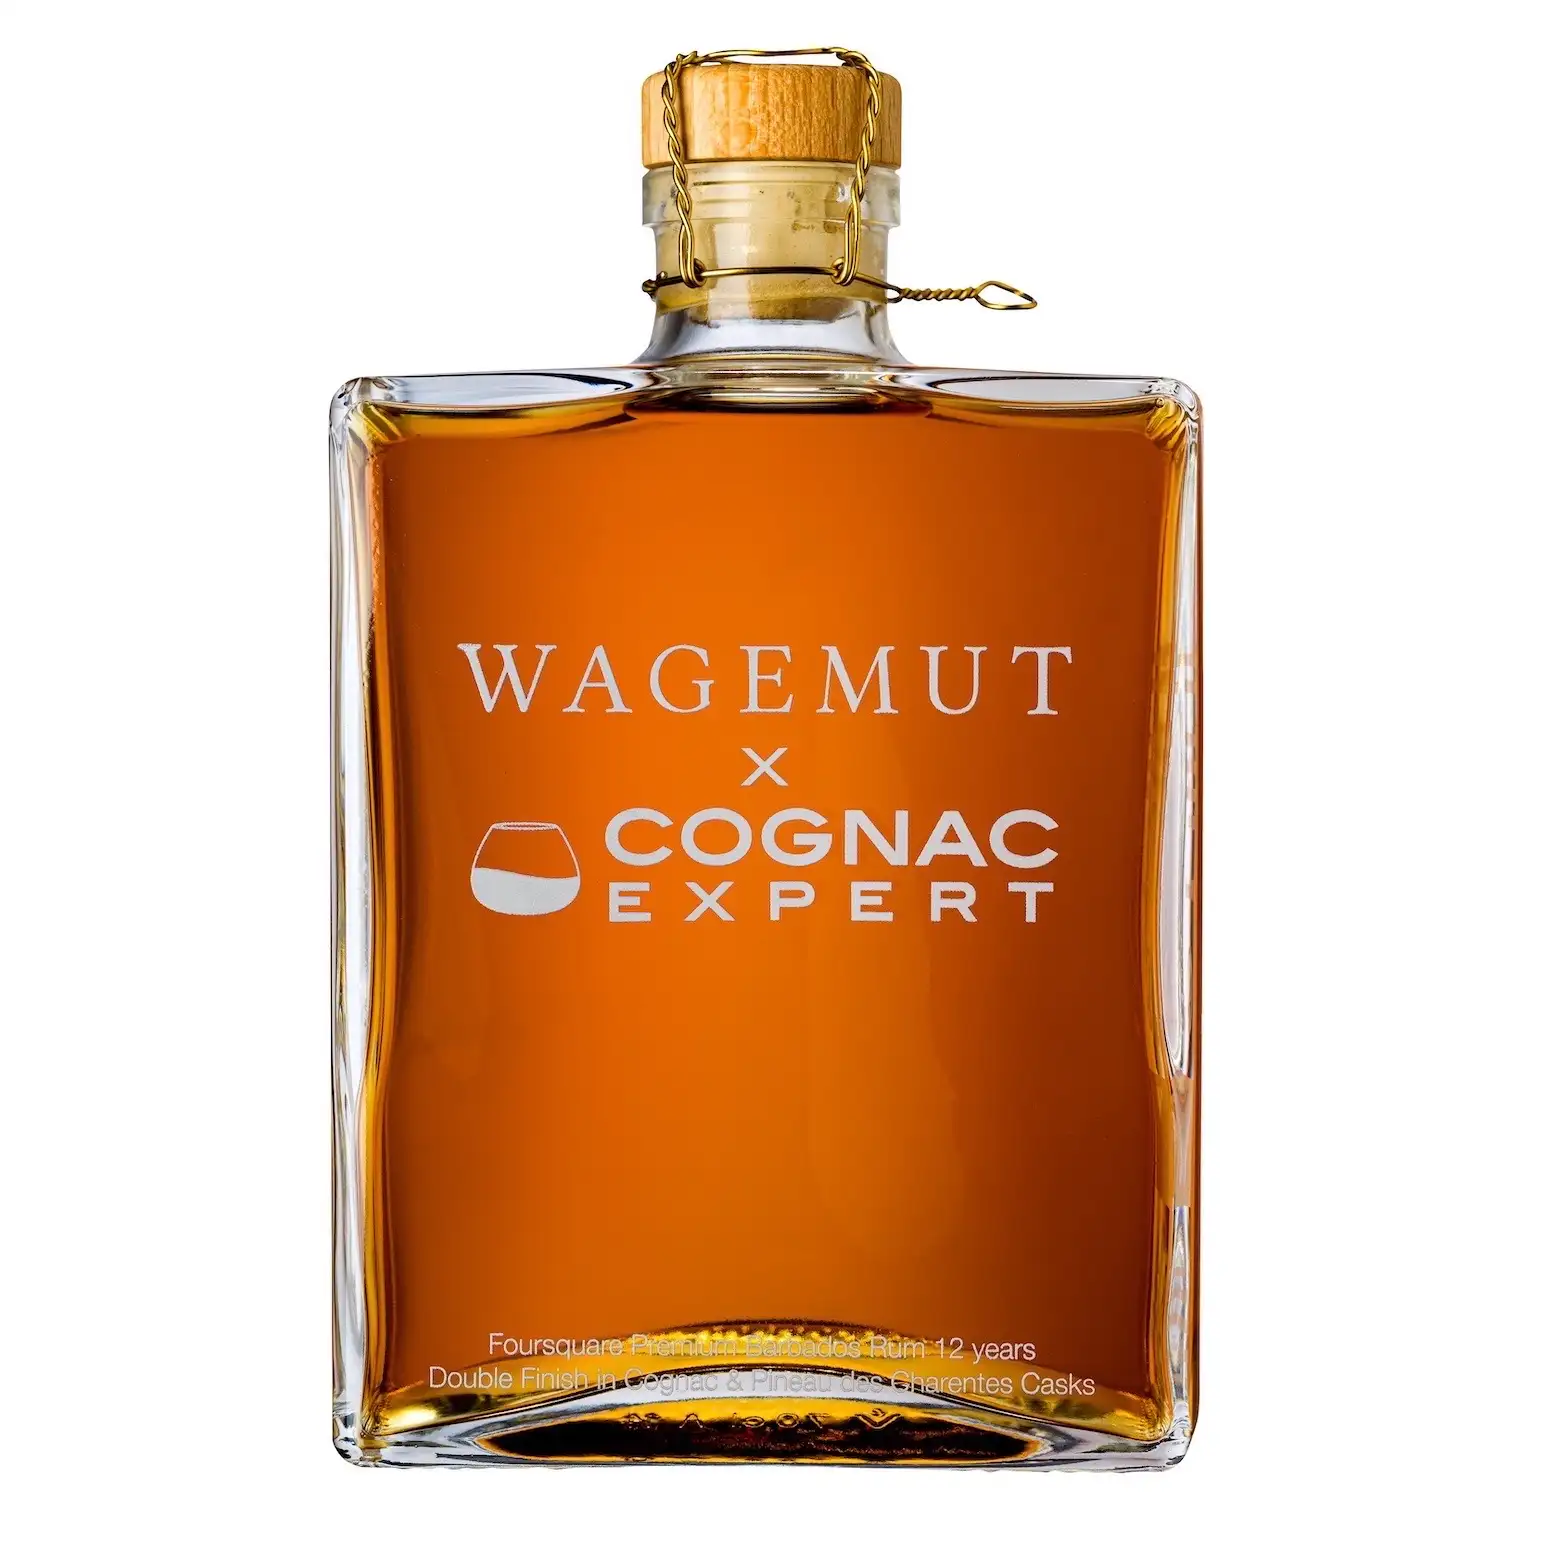 Image of the front of the bottle of the rum Wagemut x Cognac Expert